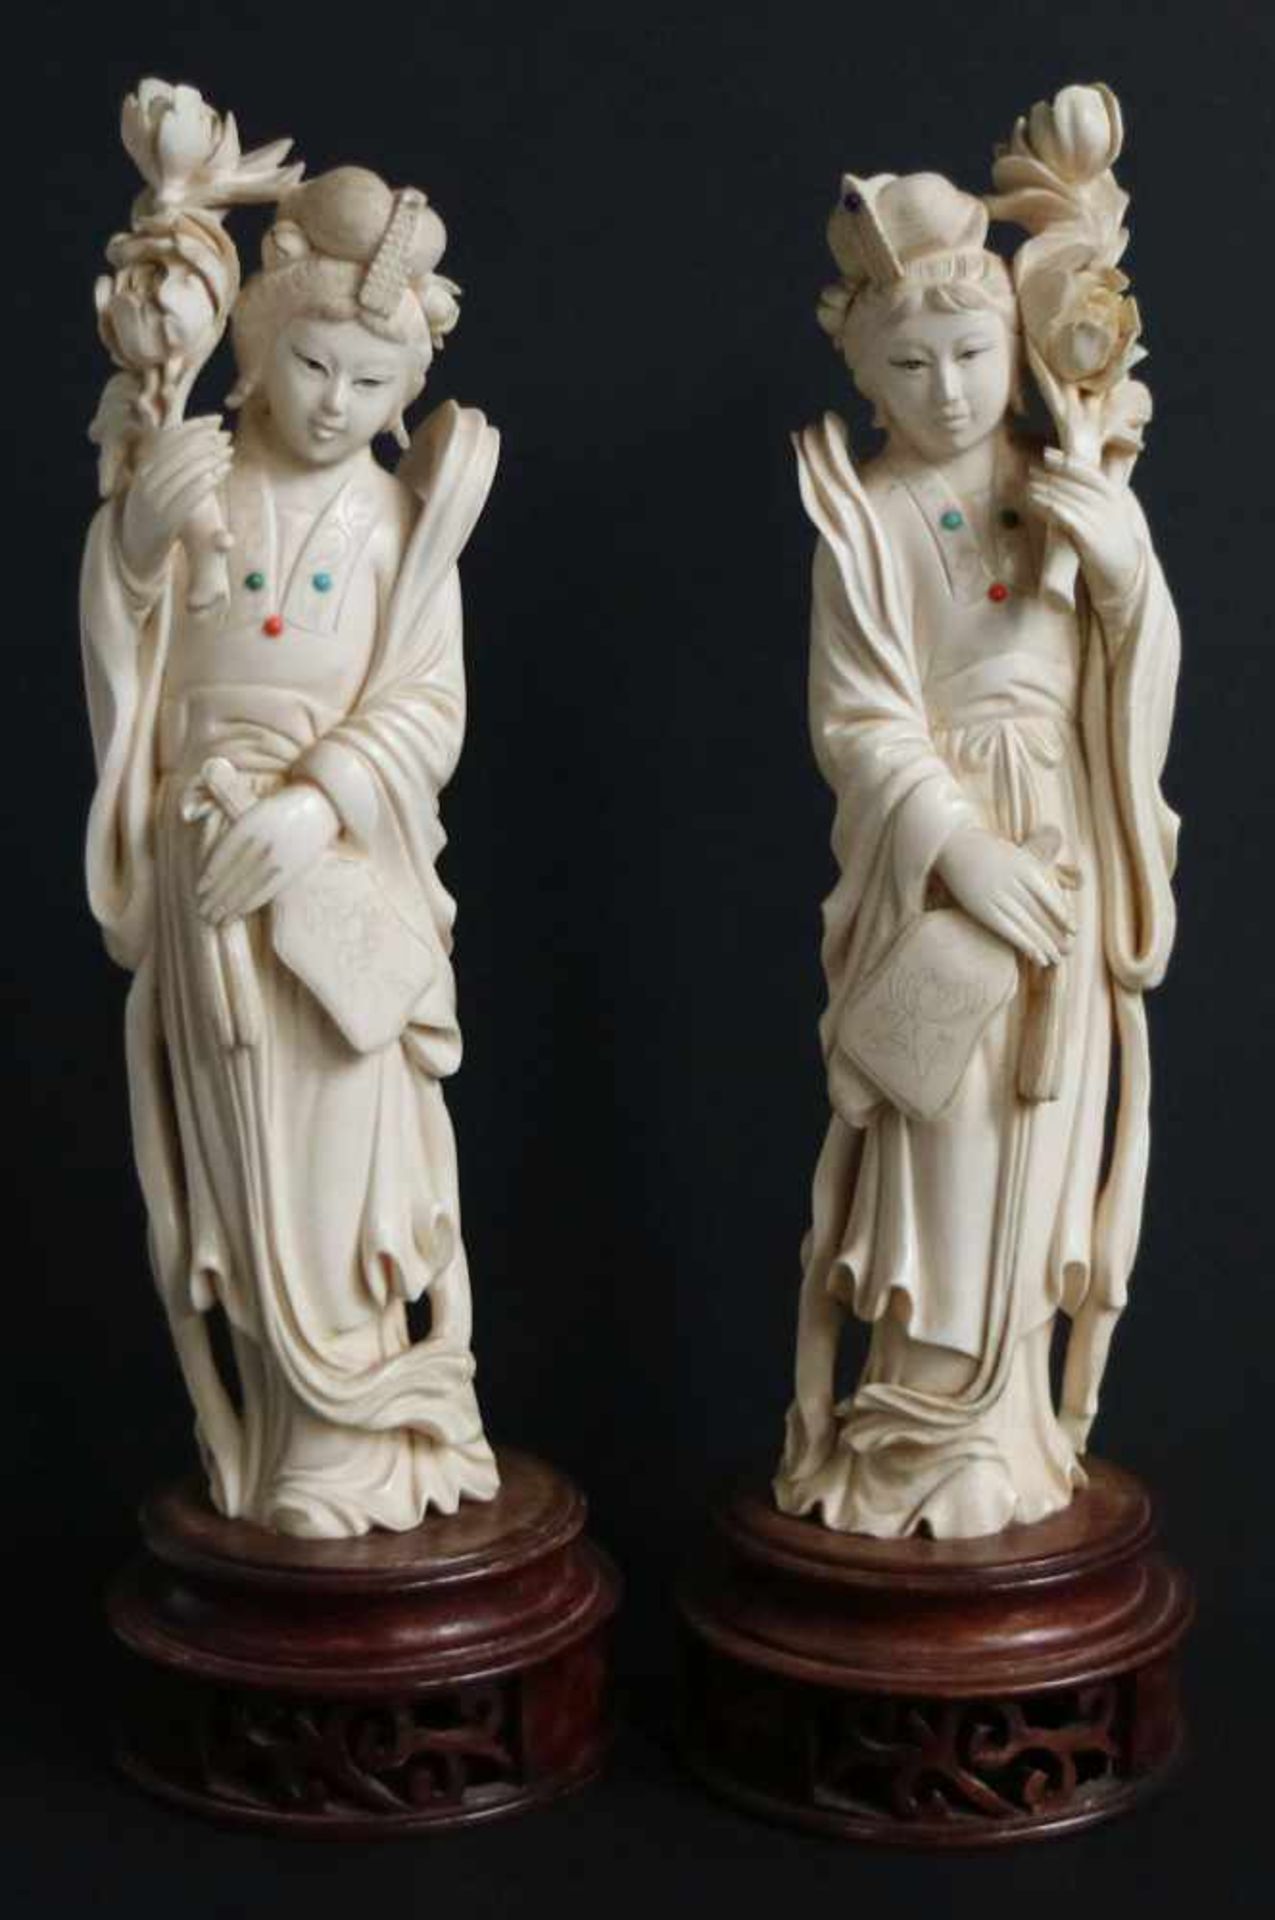 2 Chinese ivory women He Xian GuAnd colored buttons Around 1900 Certificate Arts Ivory ExpertsH